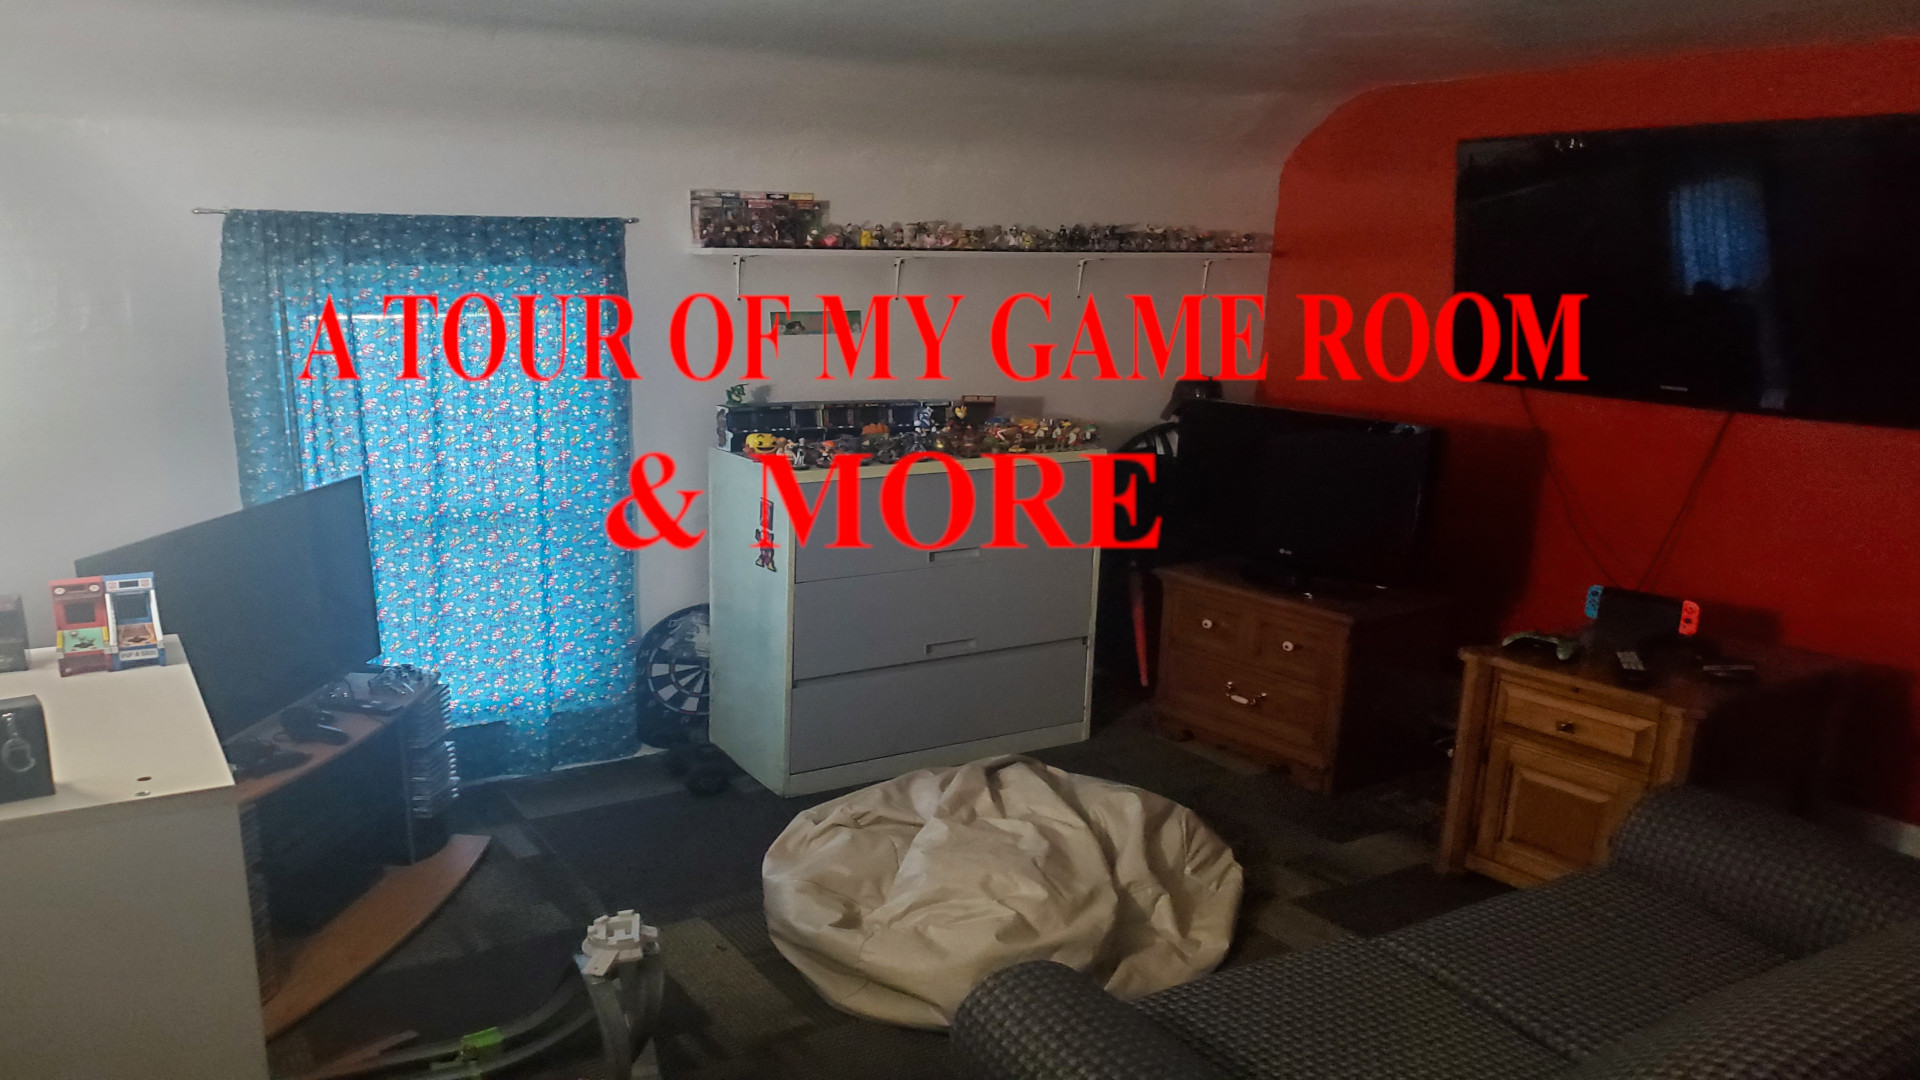 A Tour of My Game Room and More